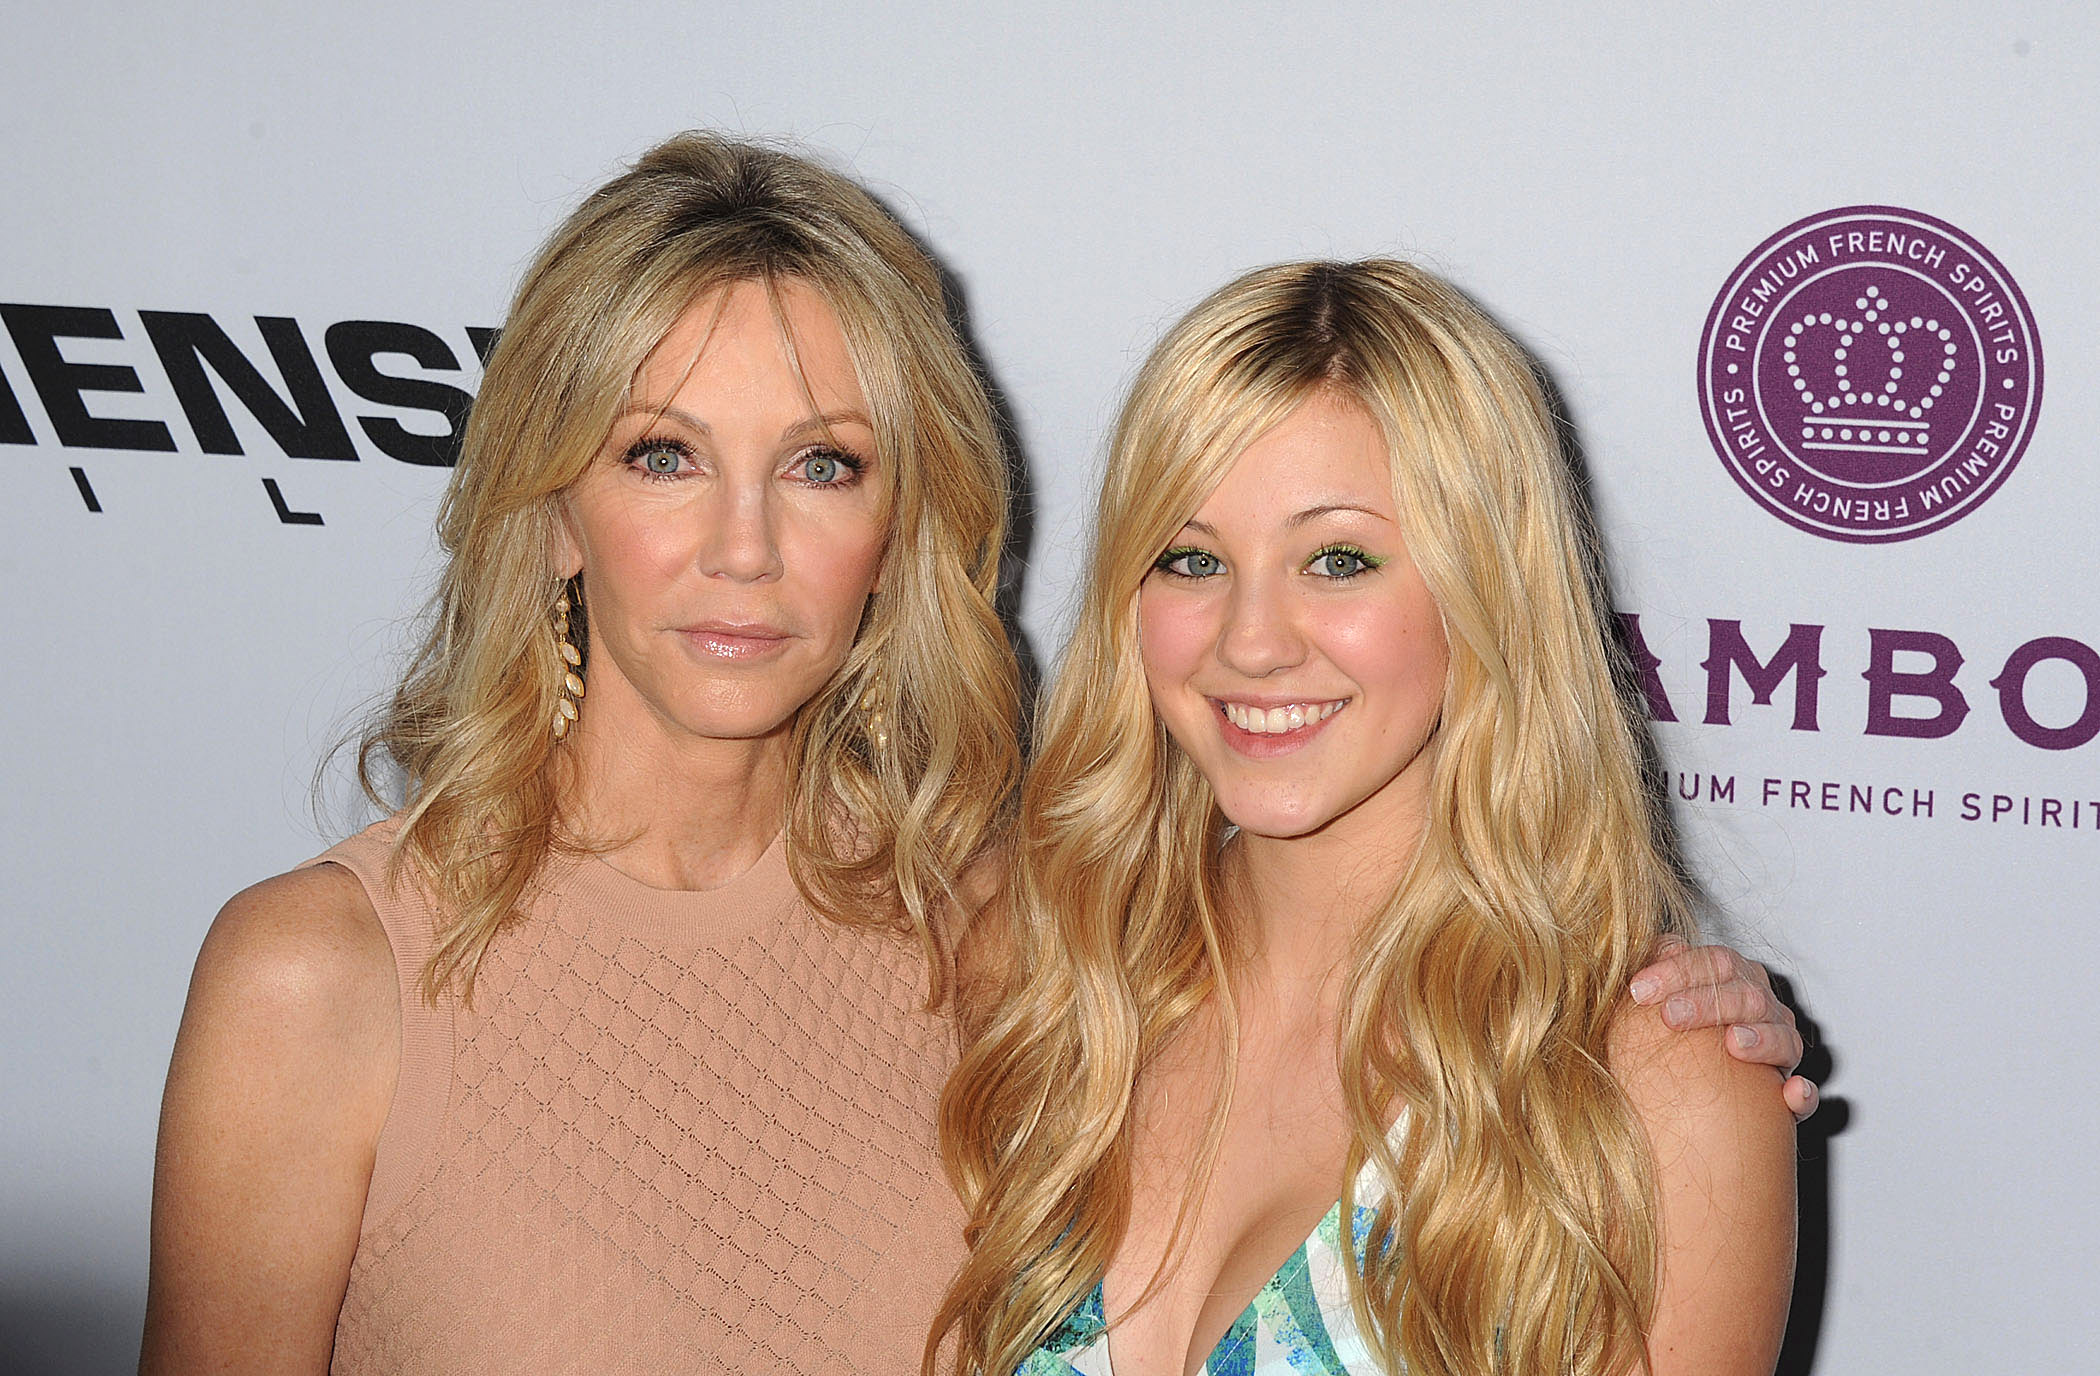 Heather Locklear and Ava Sambora attend the "Scary Movie V" premiere on April 11, 2013 in Hollywood, California | Source: Getty Images